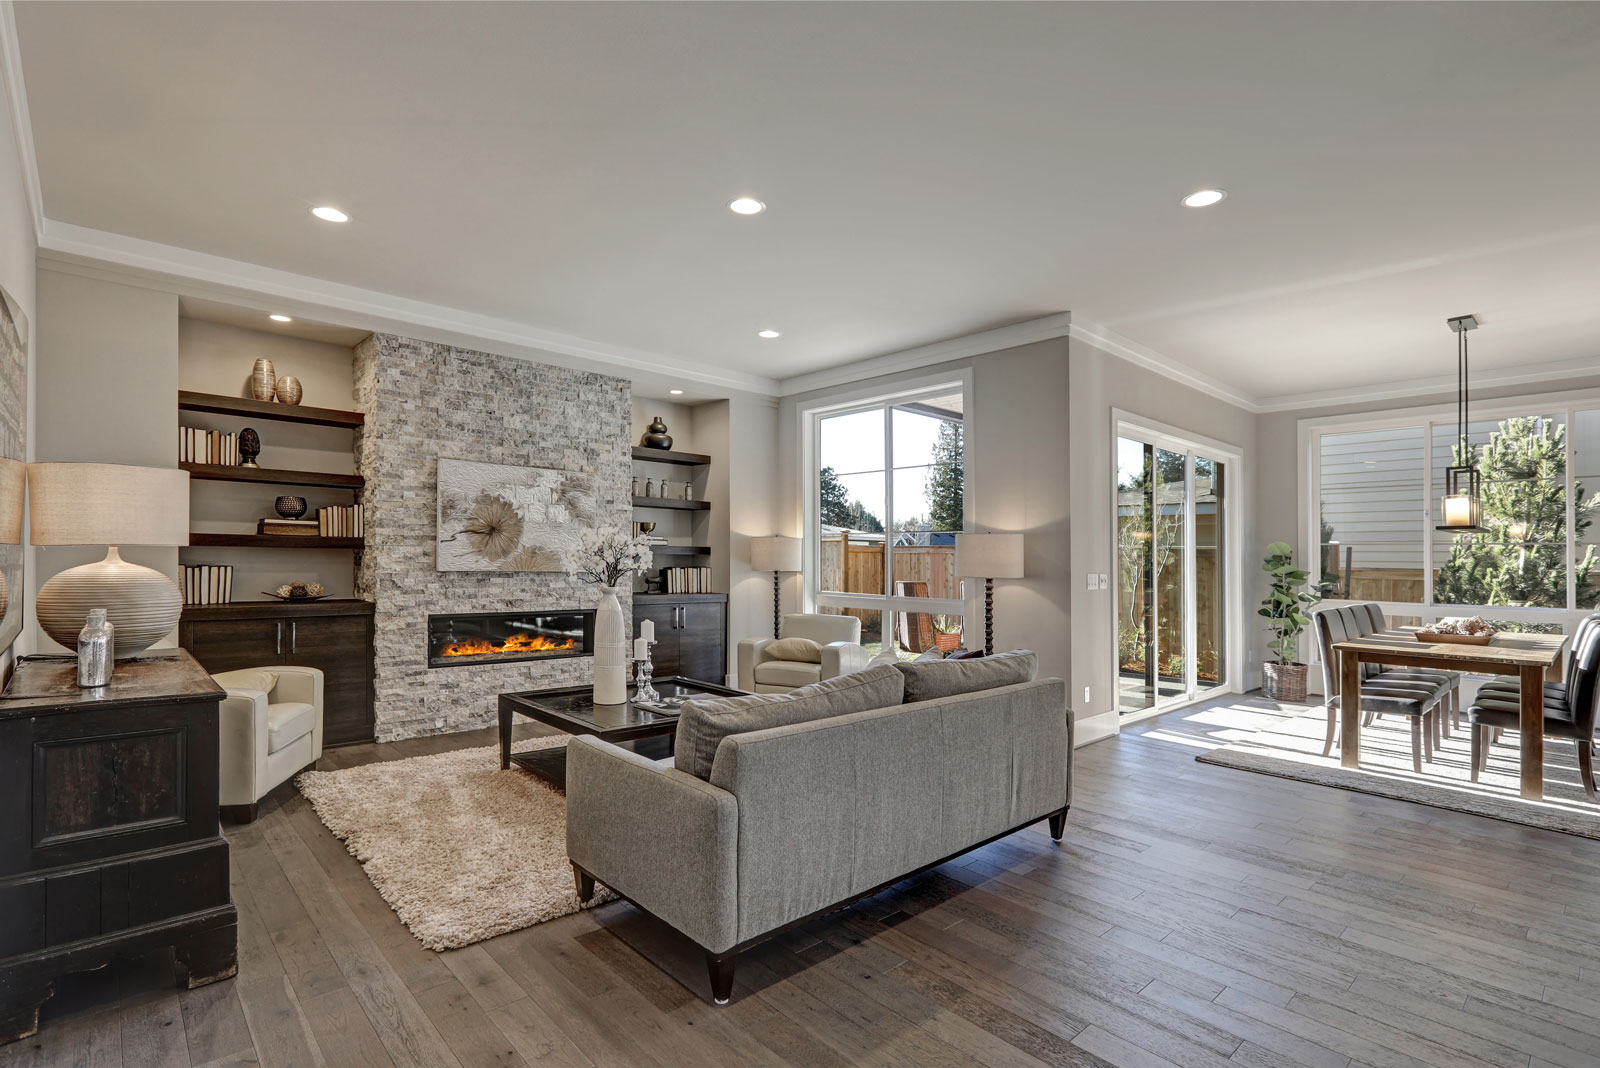 Living room interior in gray and brown colors features gray sofa atop dark hardwood floors facing stone fireplace with built-in shelves.